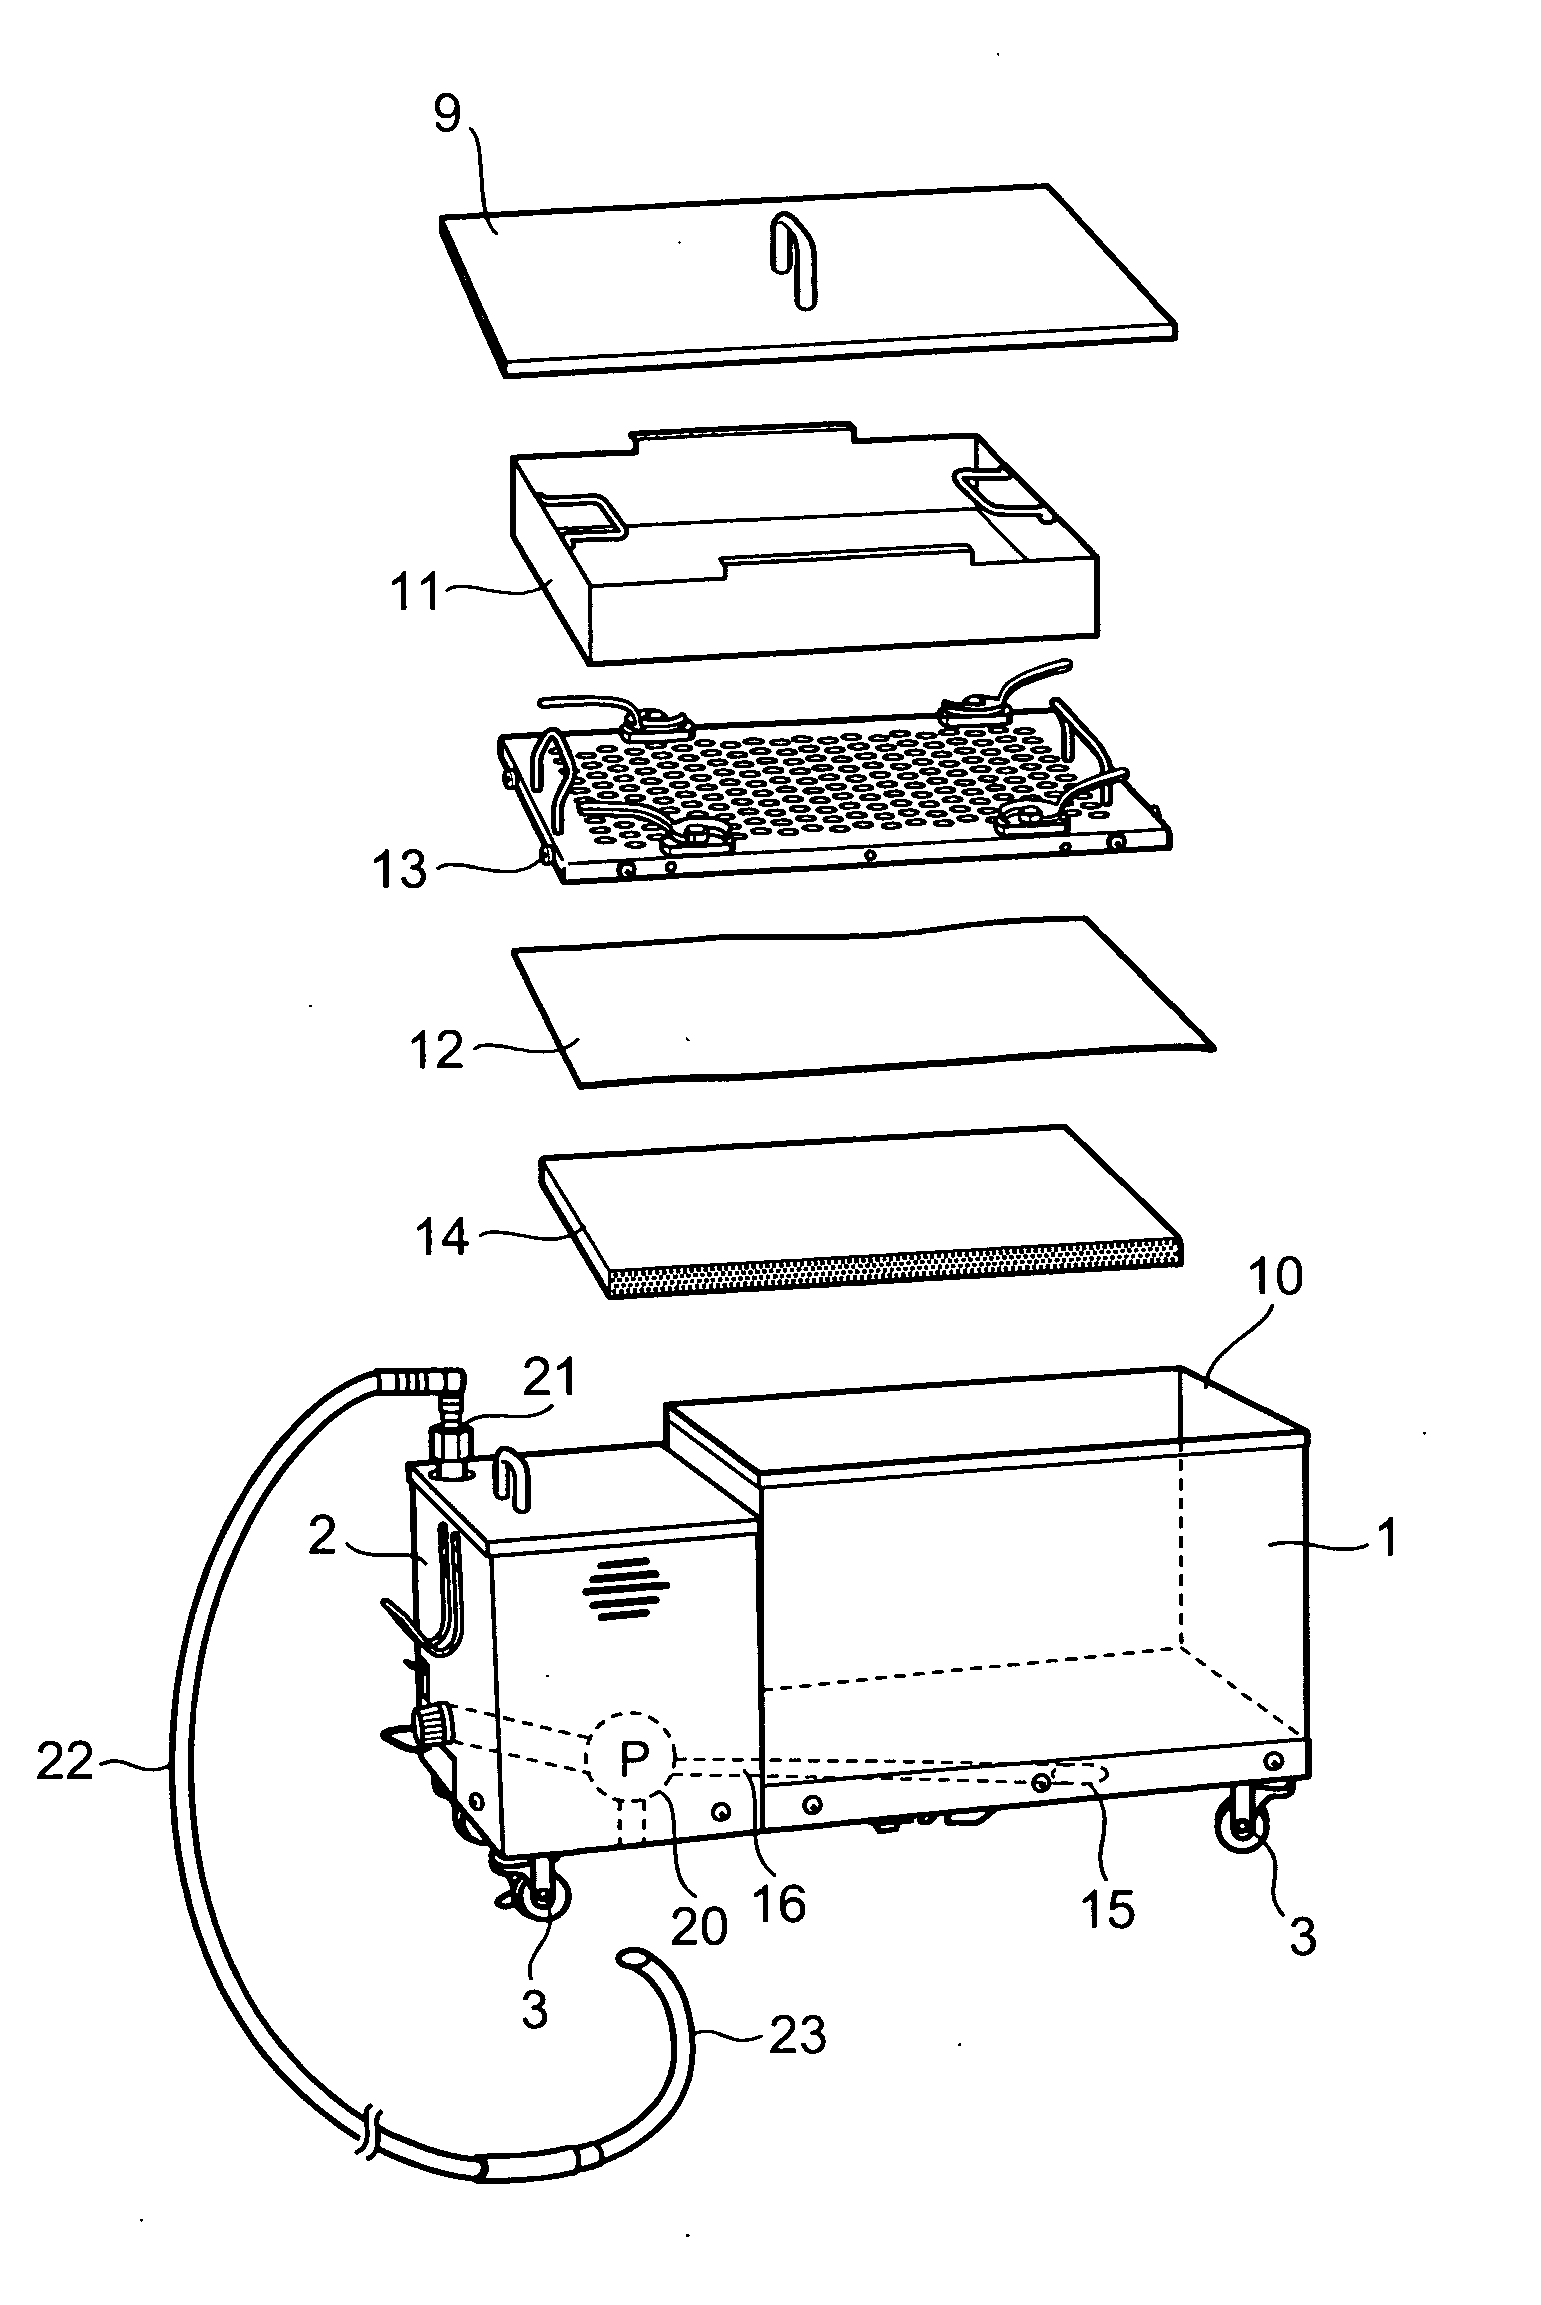 Method for purifying cooking oil and cooking oil filter apparatus